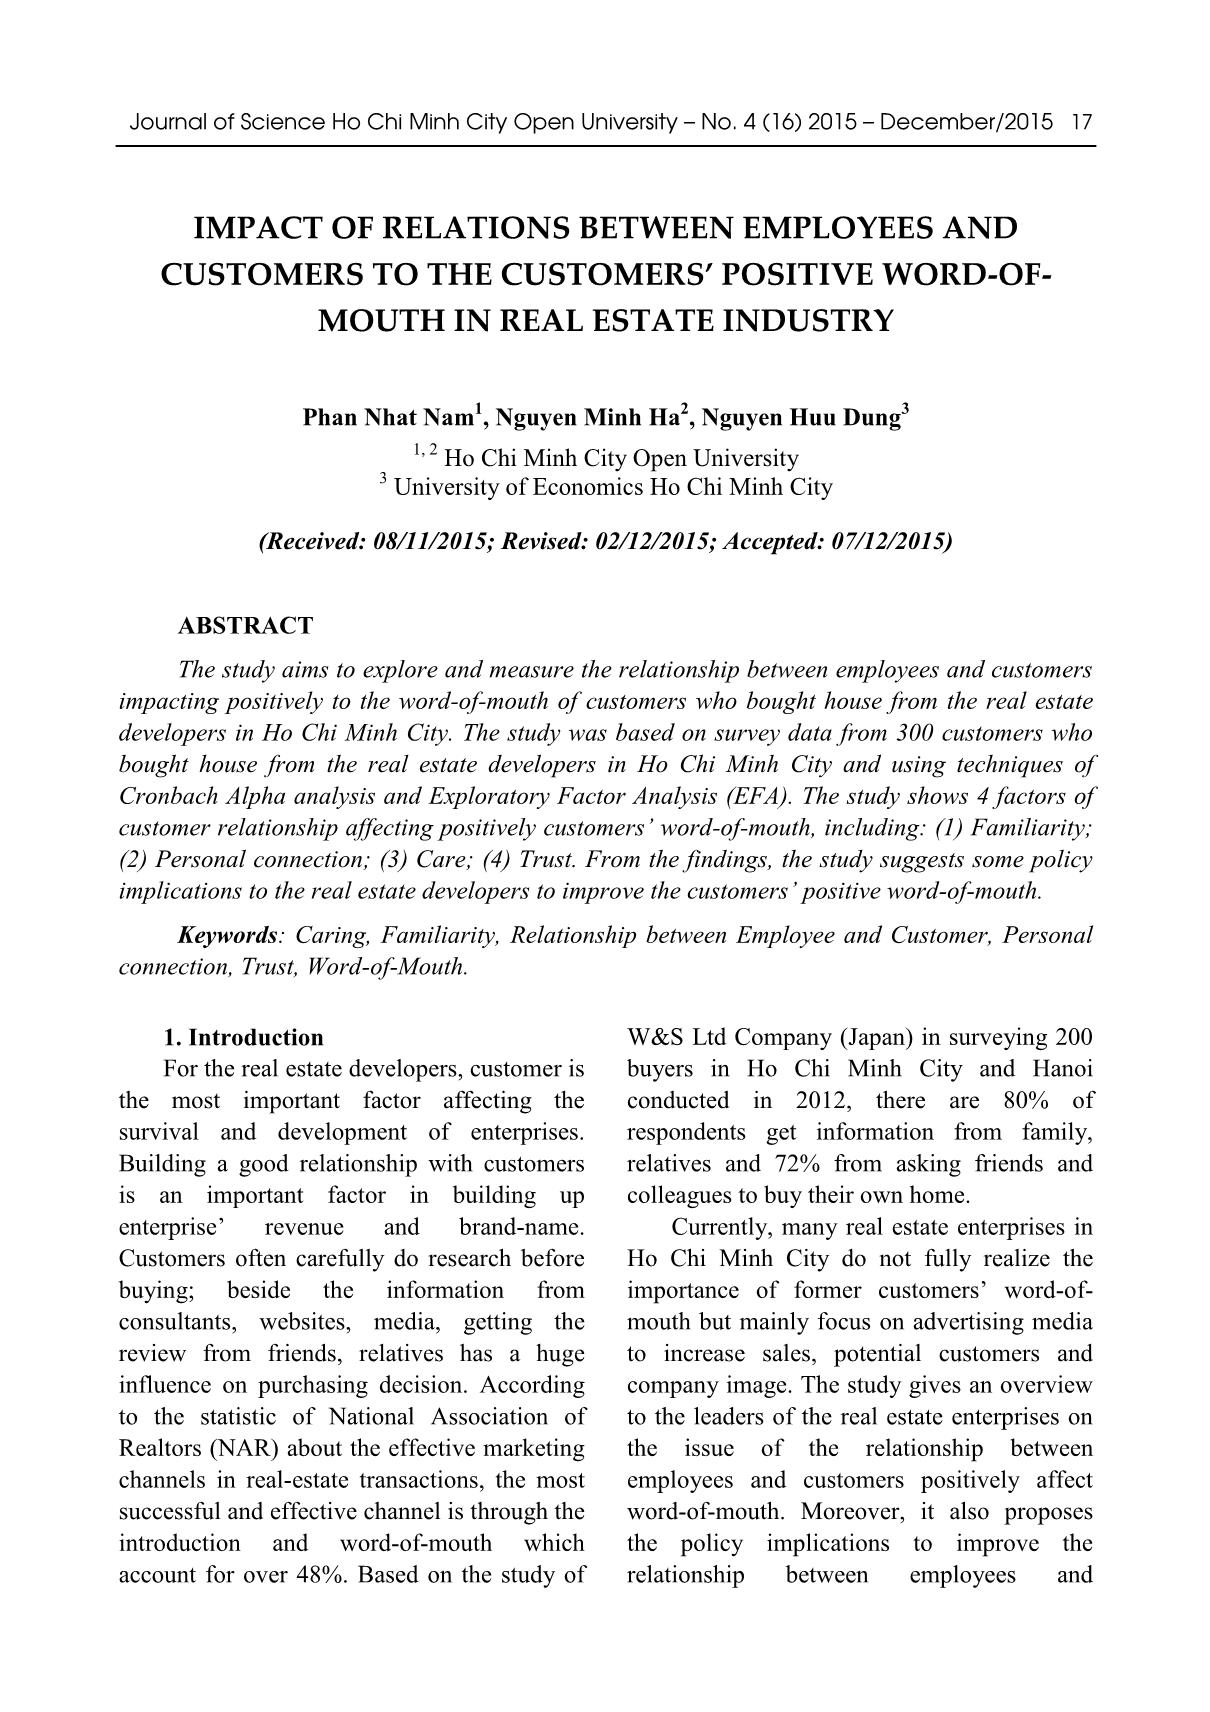 Impact of relations between employees and customers to the customers’ positive word-ofmouth in real estate industry trang 1